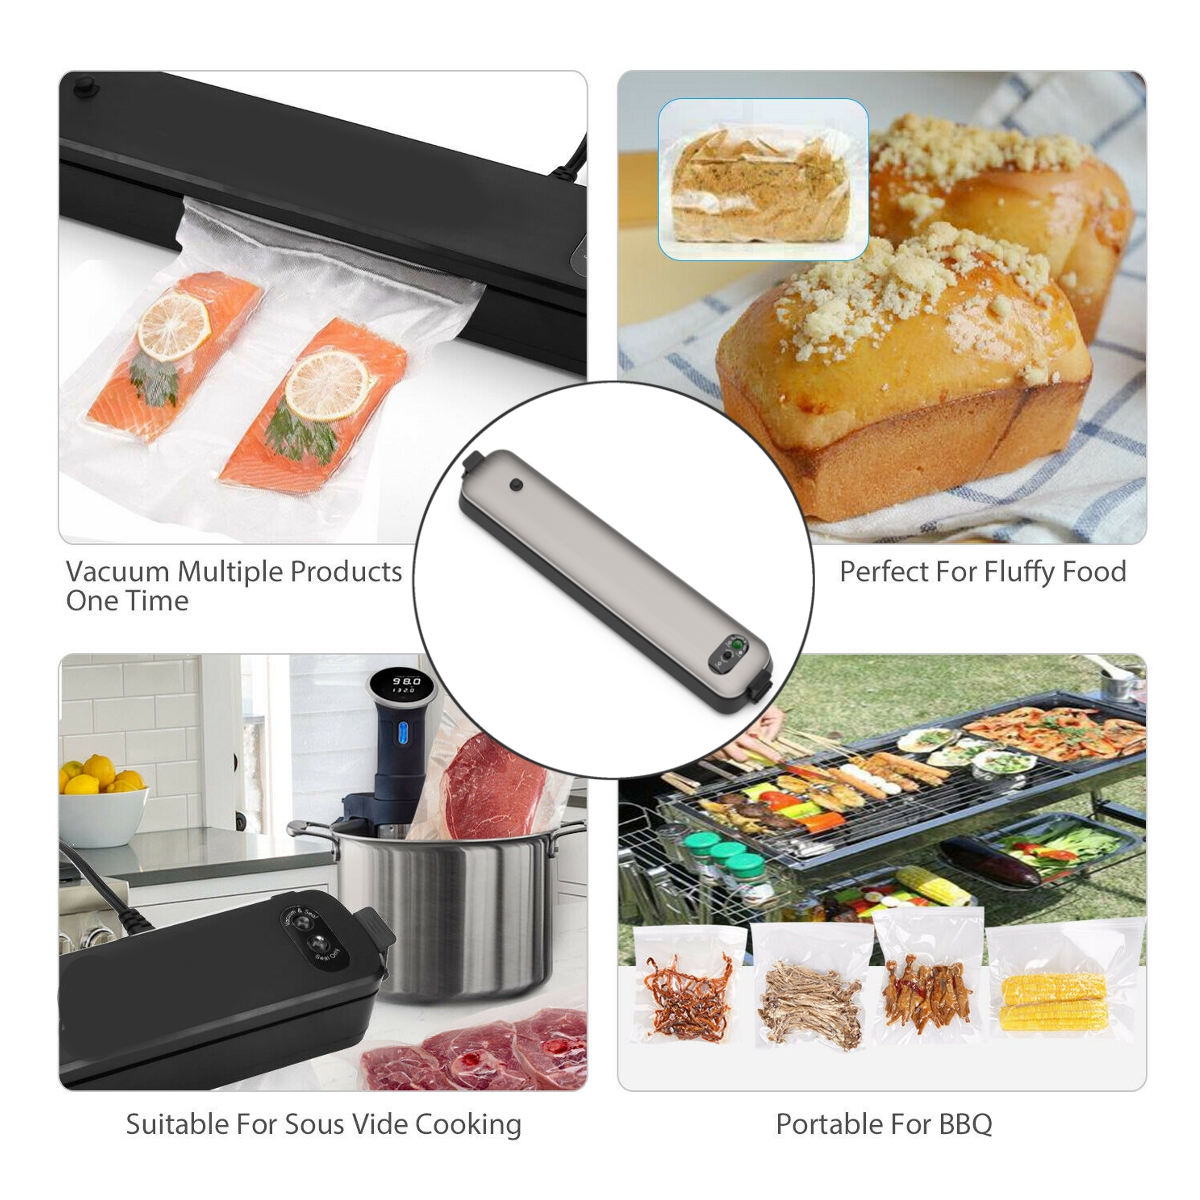 Household-Vacuum-Sealer-Machine-Seal-Meal-Food-Vacuum-Sealer-System-with-15-Free-Bags-One-Touch-Cont-1938046-4